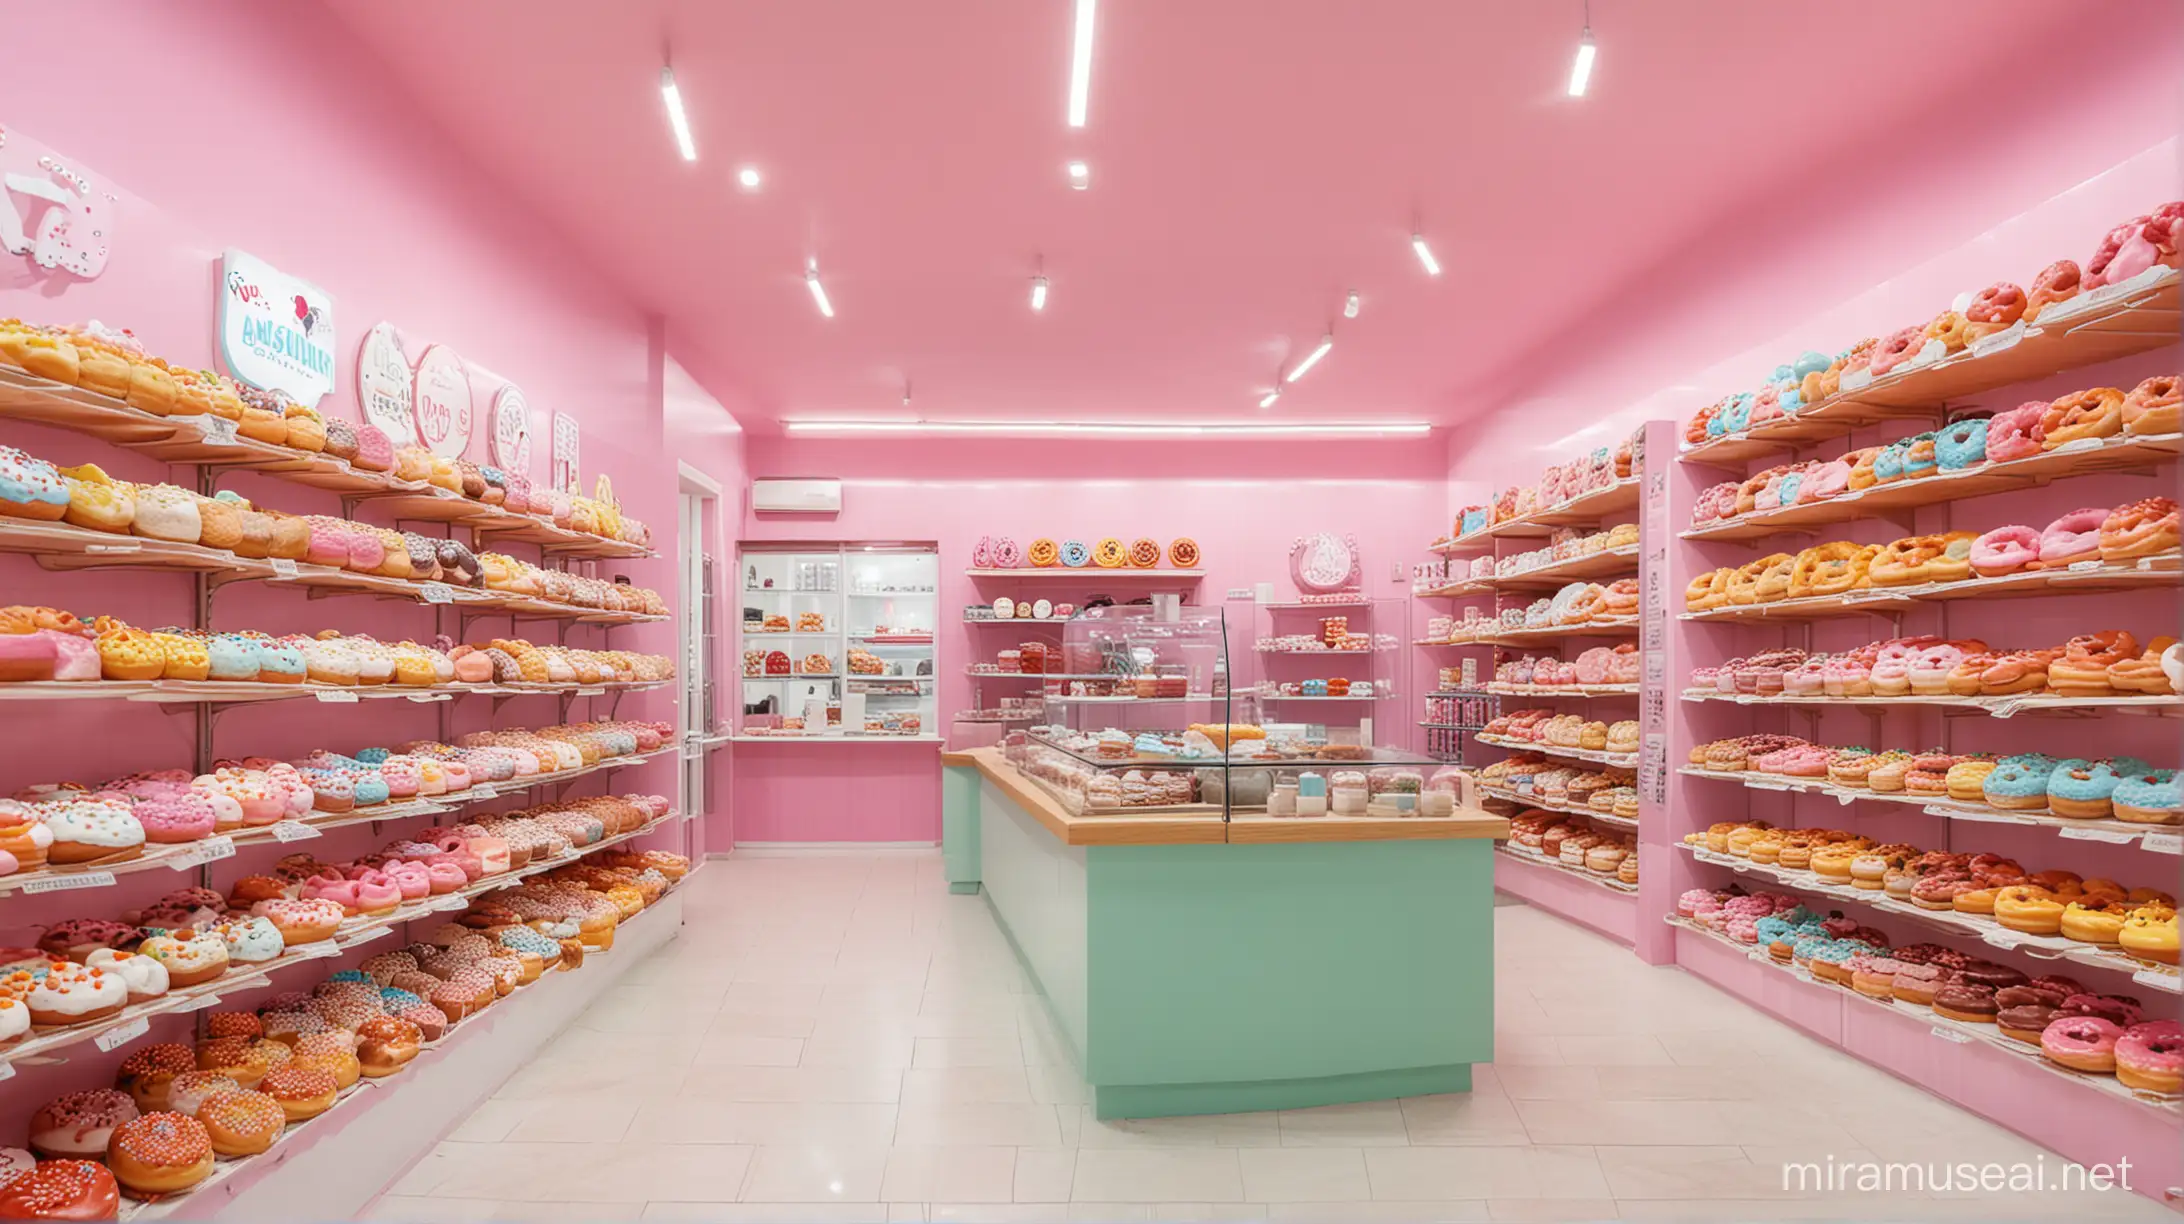 Vibrant Donuts and Cakes Shop Displaying Colorful Delights